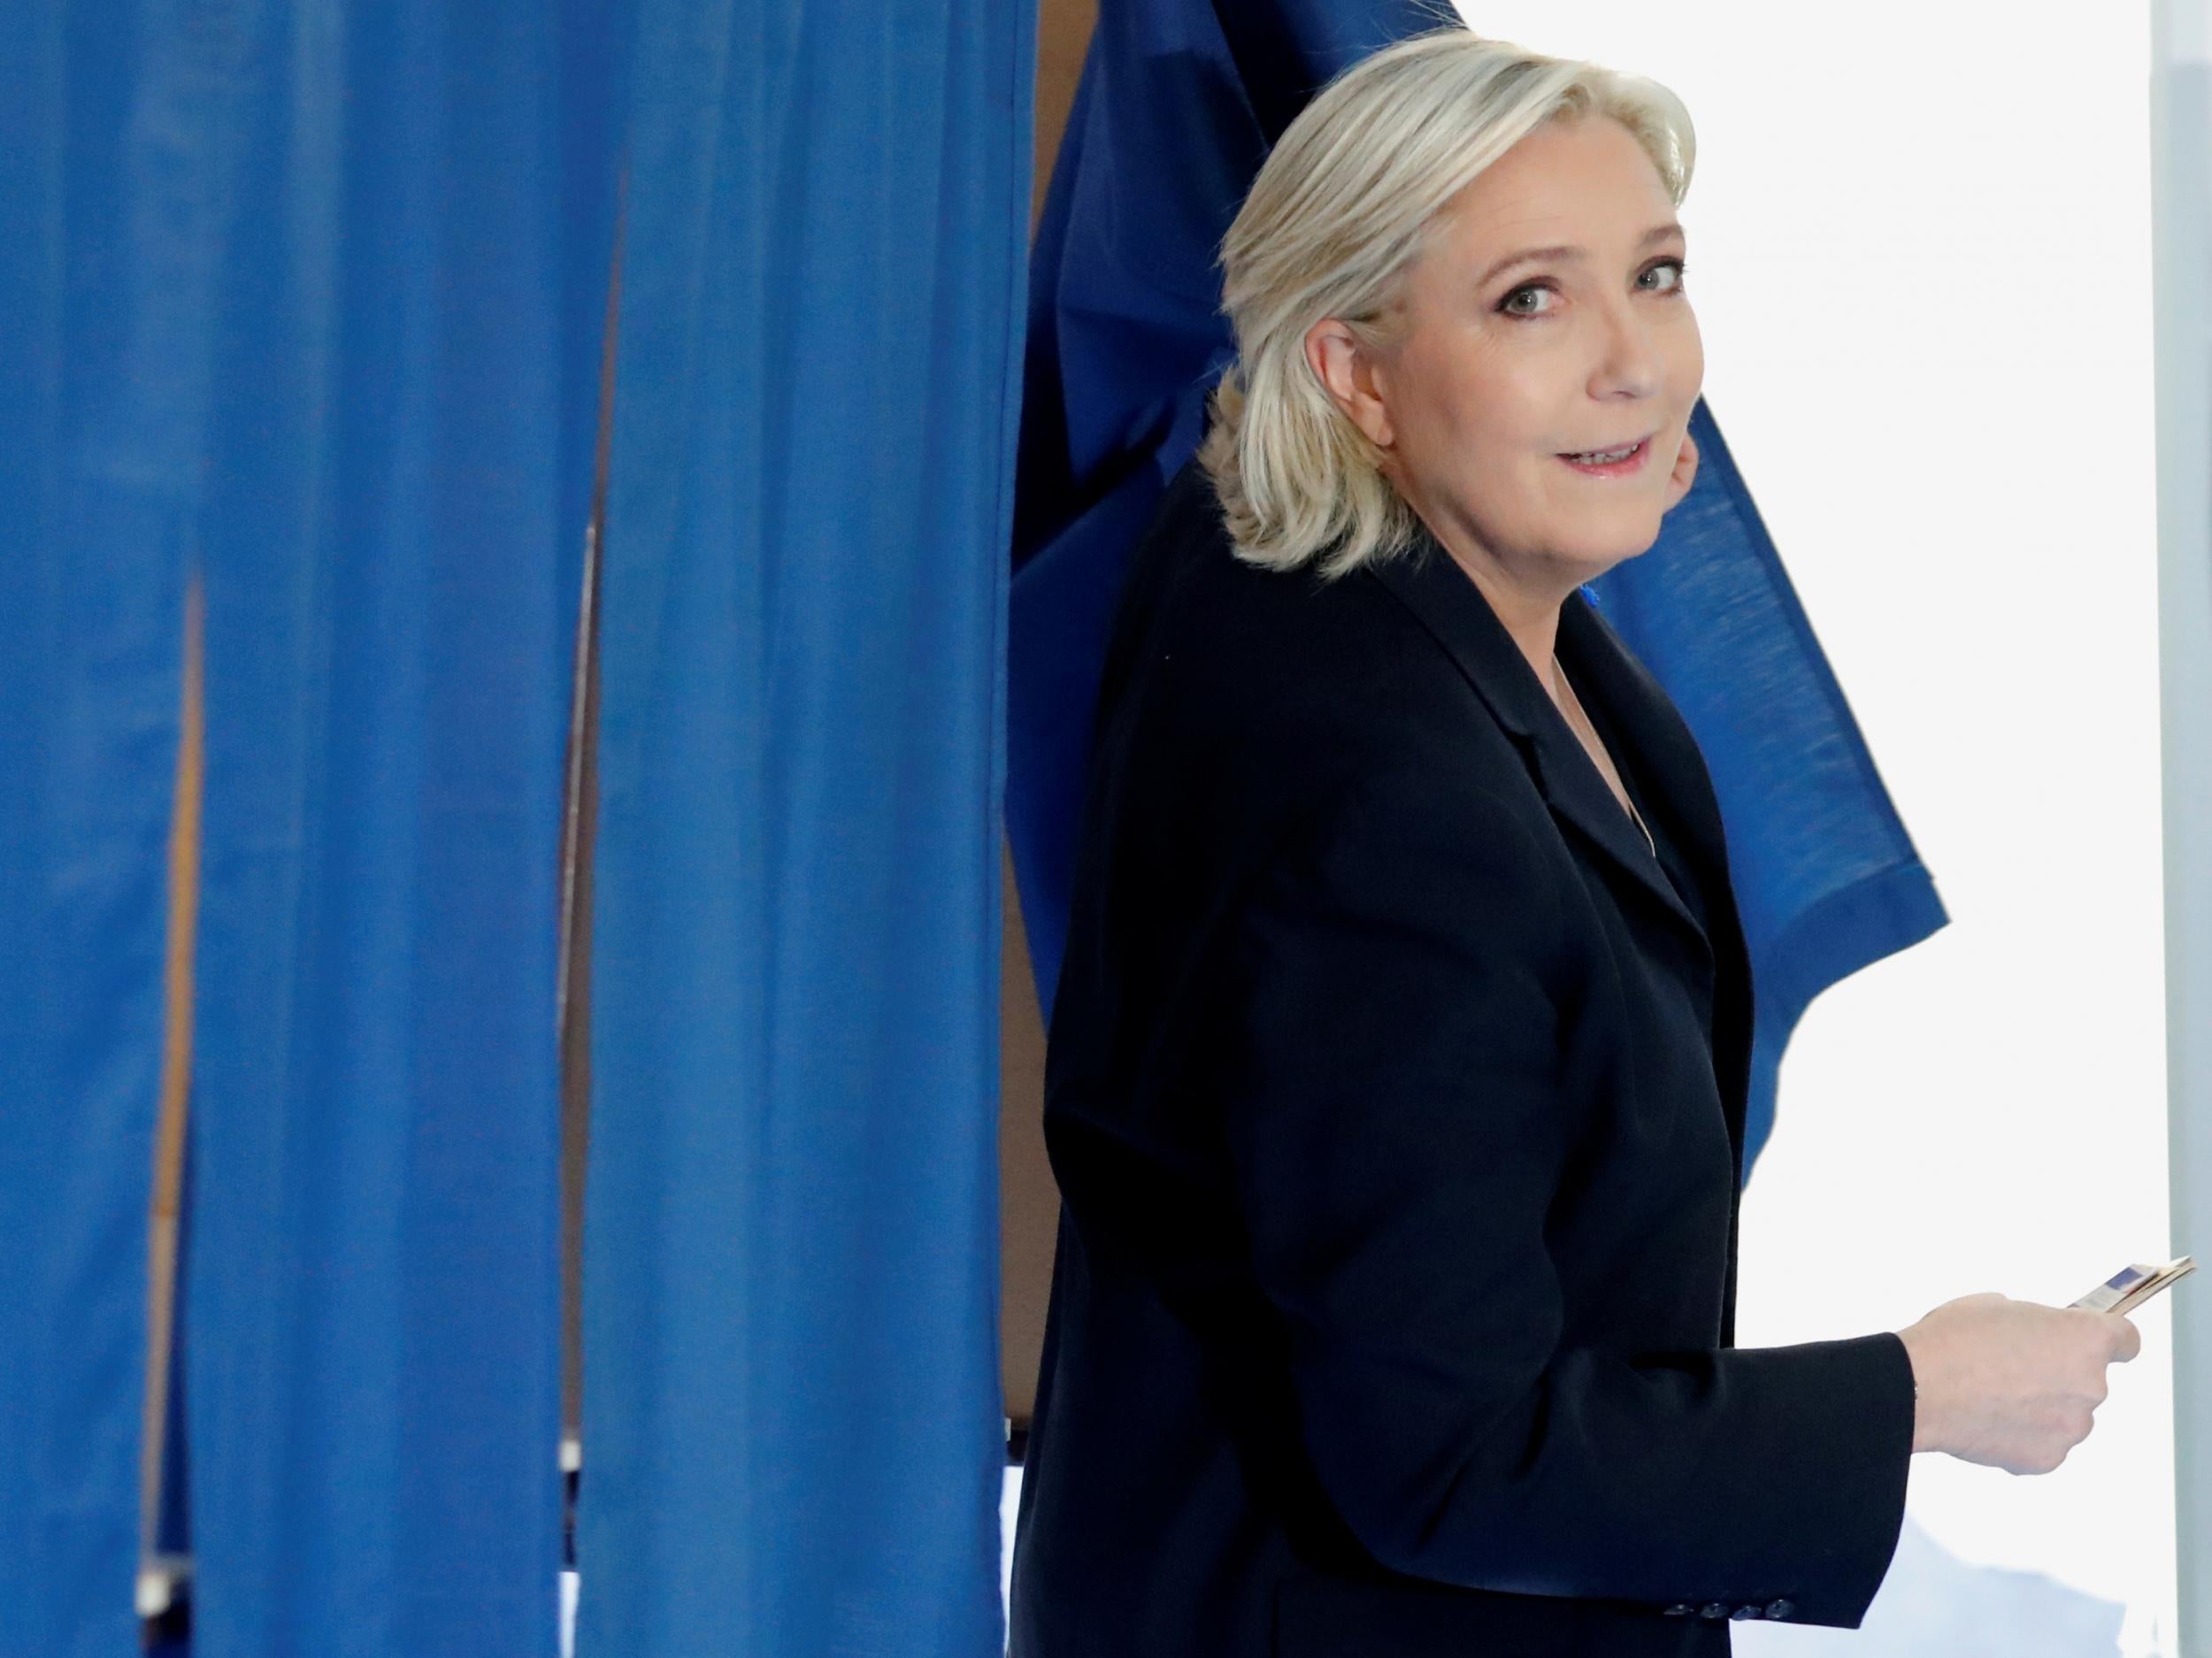 National Front leader Marine Le Pen casts her vote in yesterday's French presidential election at a polling station in Henin-Beaumont